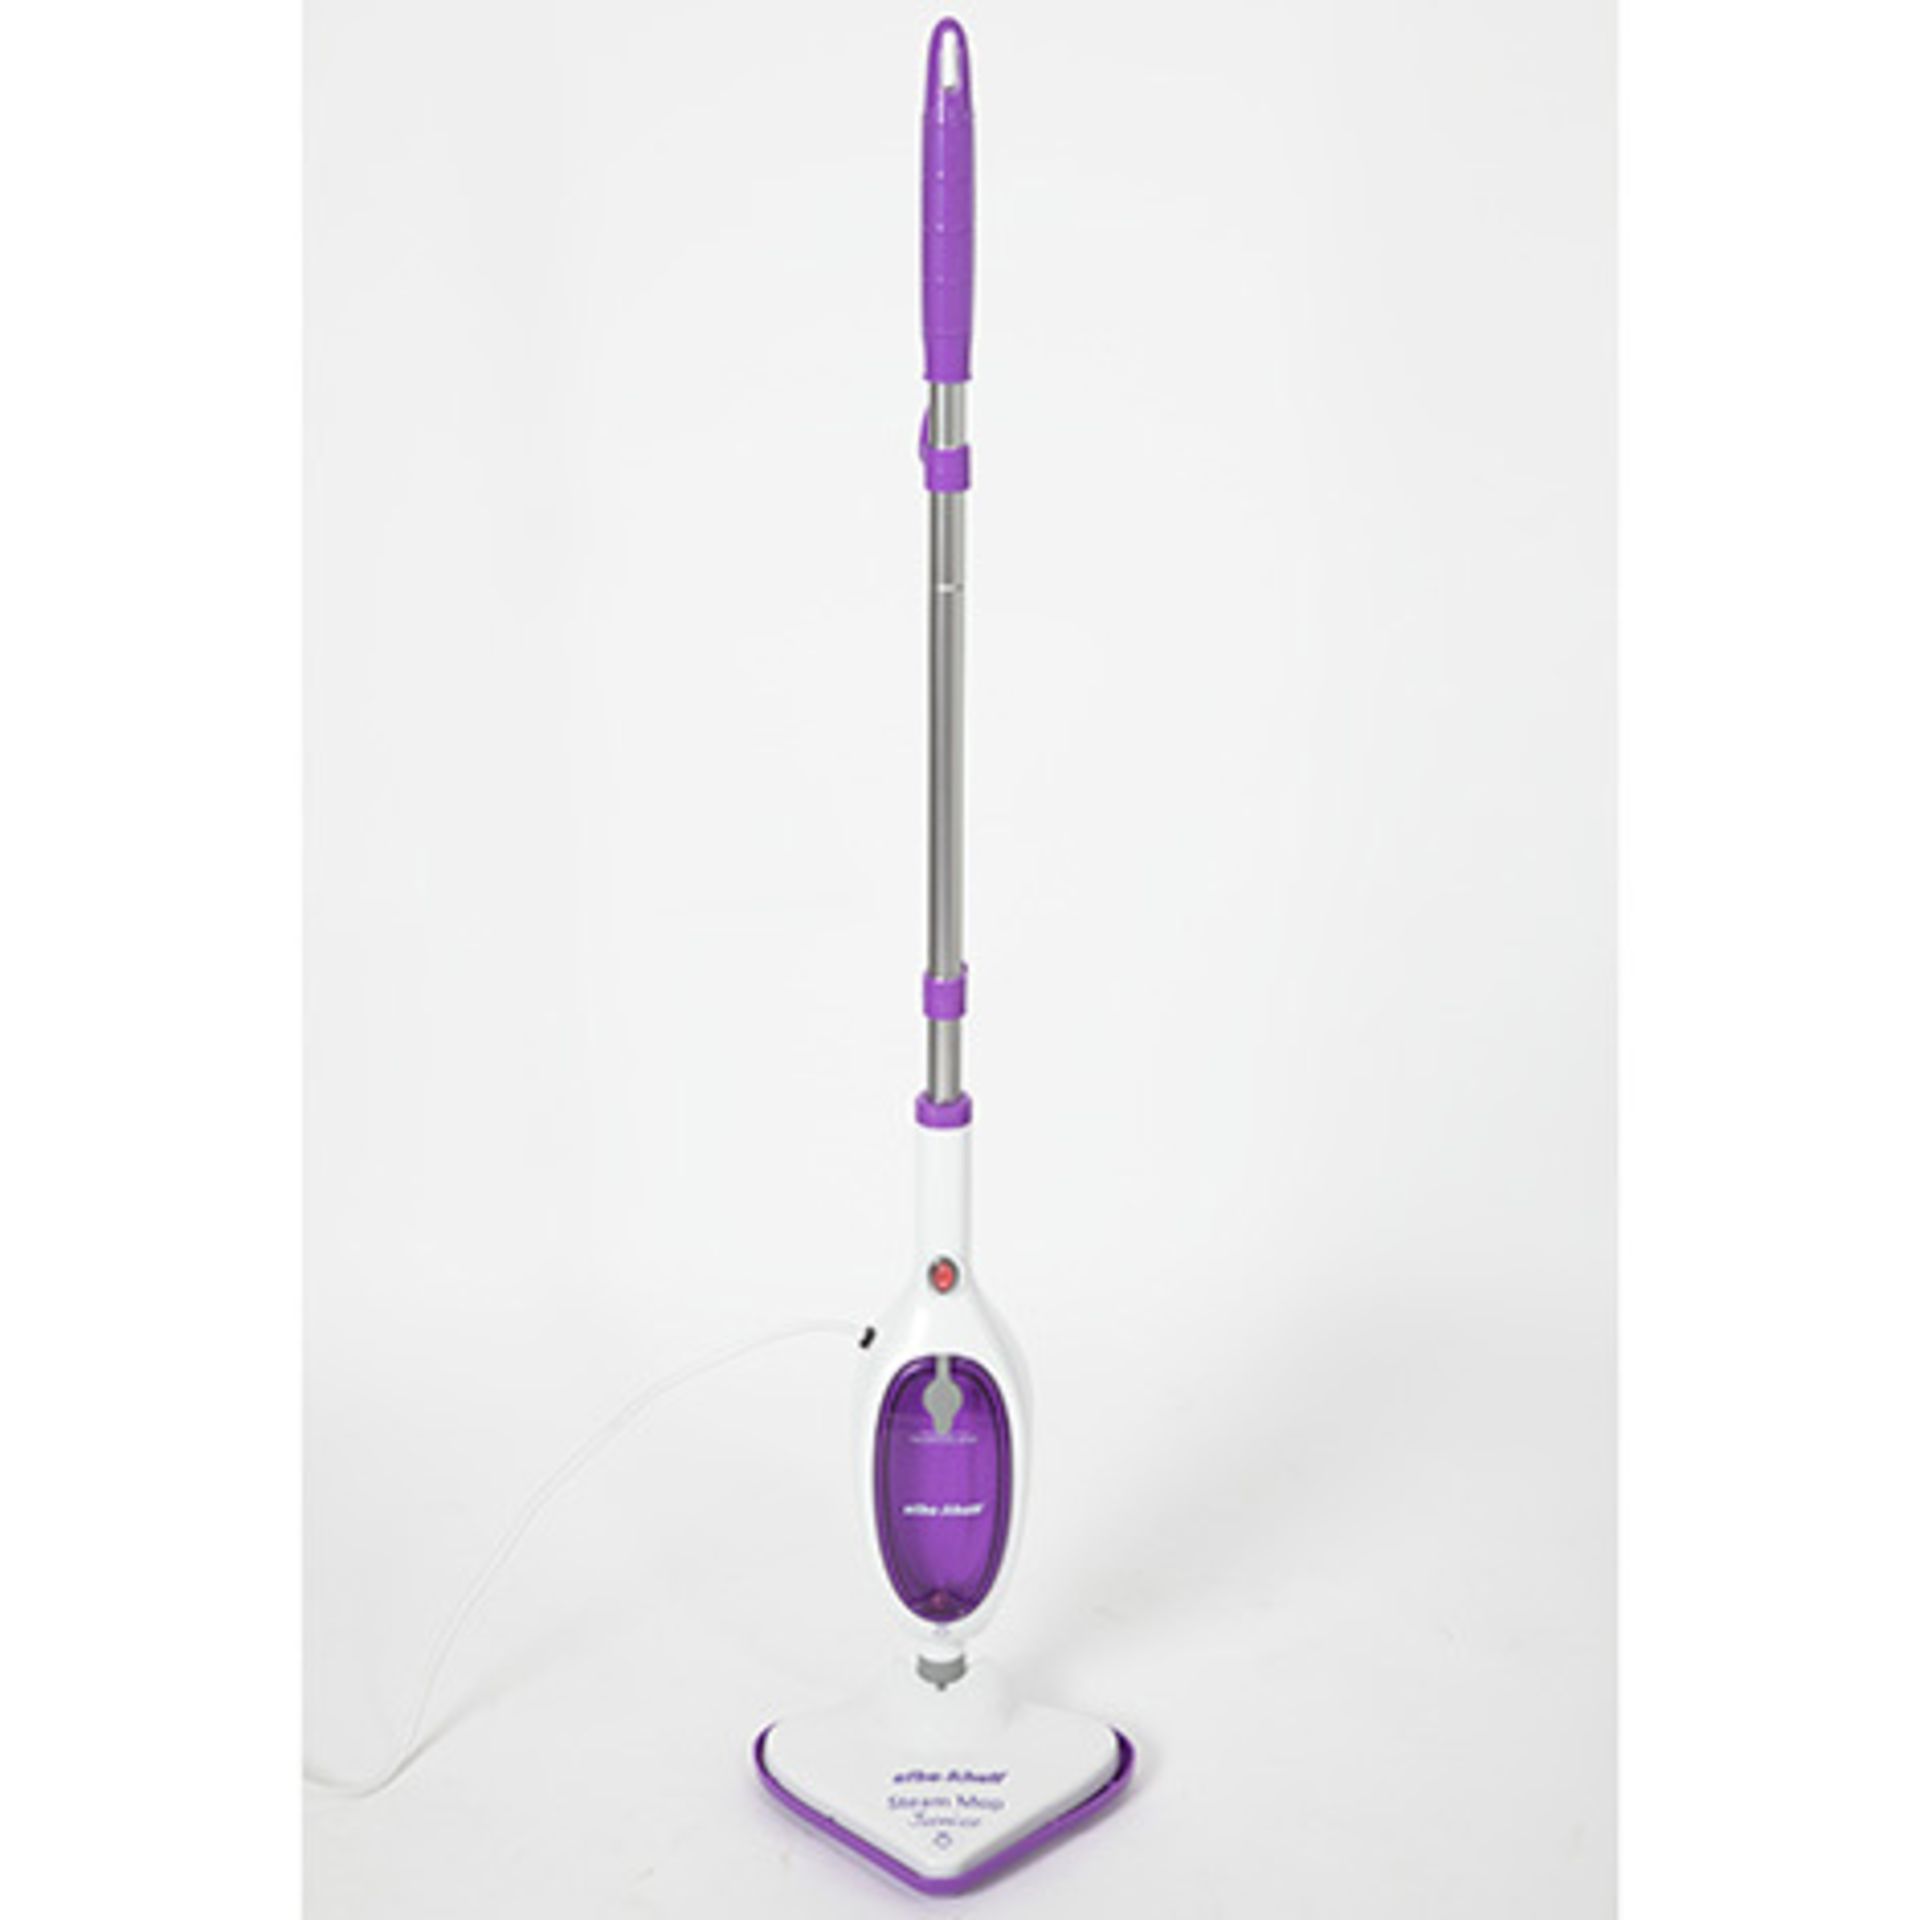 V Efbe-Schott Steam Mop (New And Boxed) Colours And Model May Vary RRP59.99 - Image 2 of 2